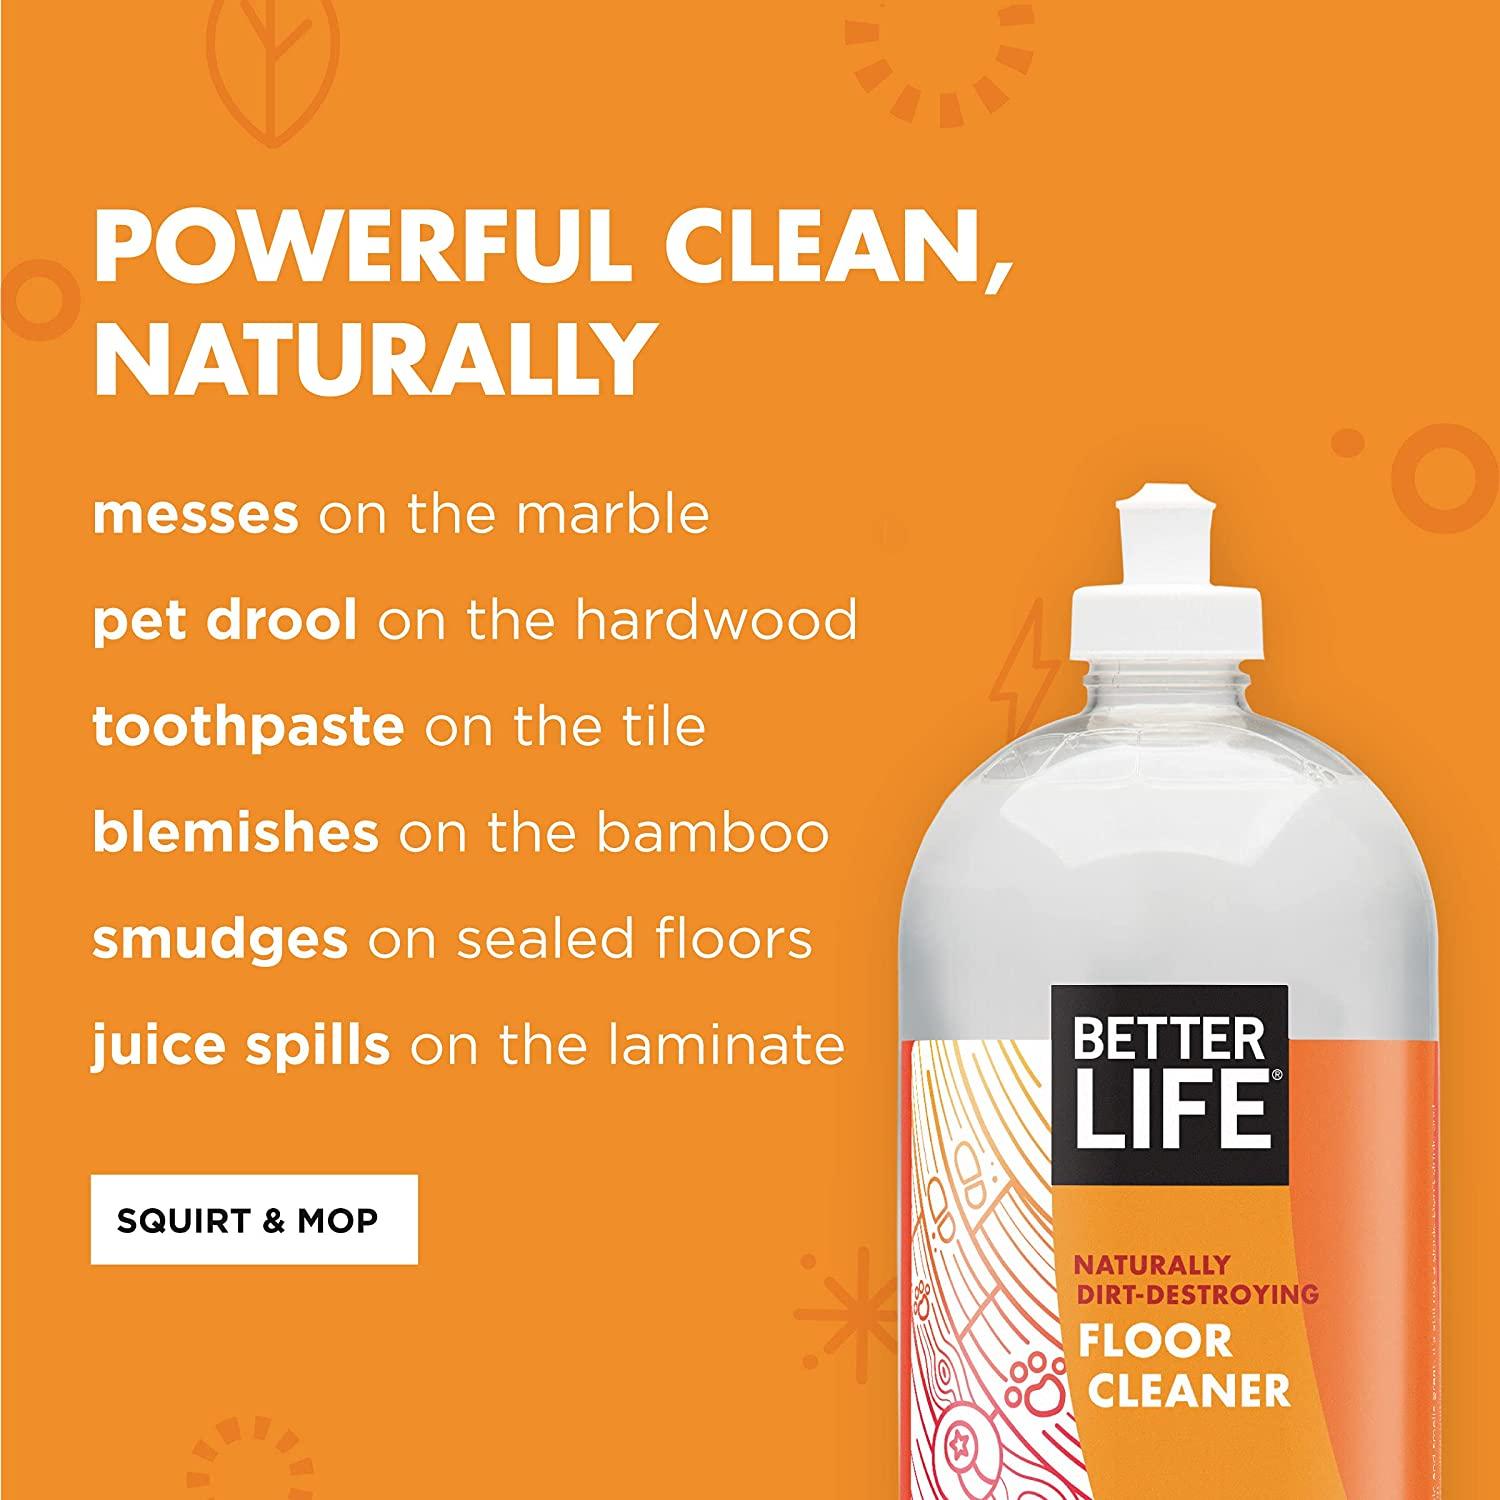 Better Life Simply Floored! Cleaner, Natural, Floor, Citrus Mint - 32 oz